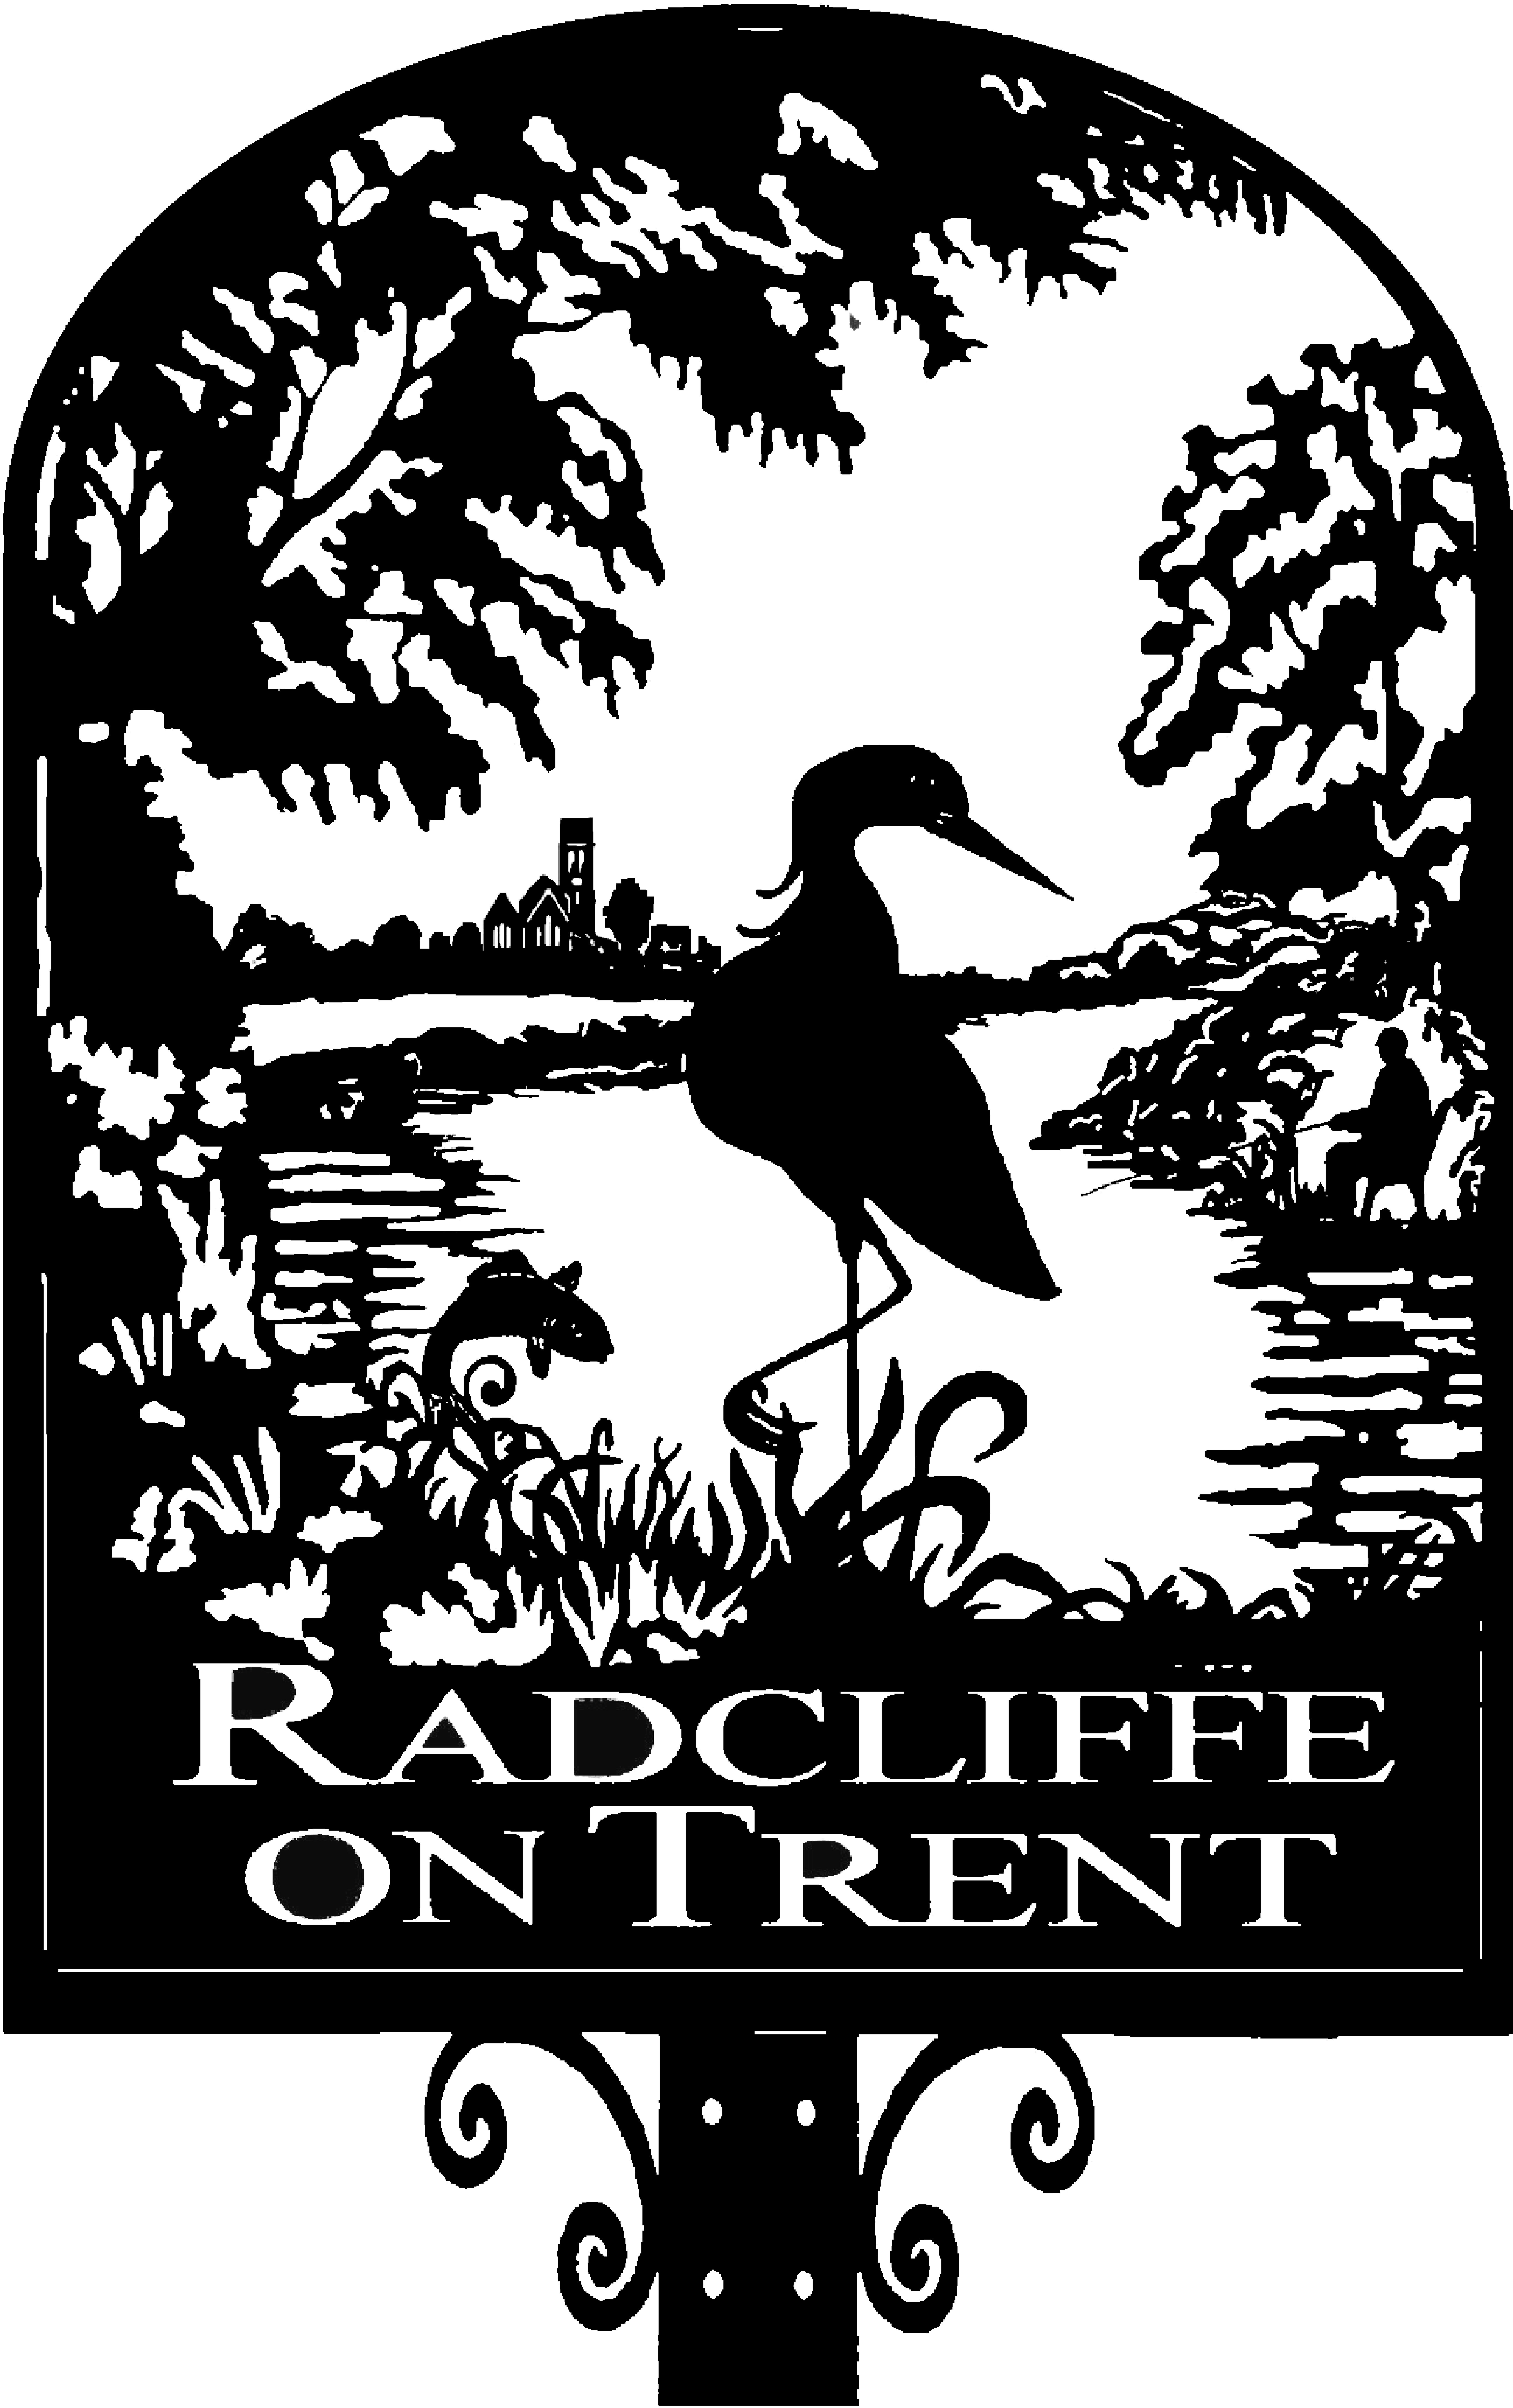 Radcliffe on Trent Village sign showing a heron by the river